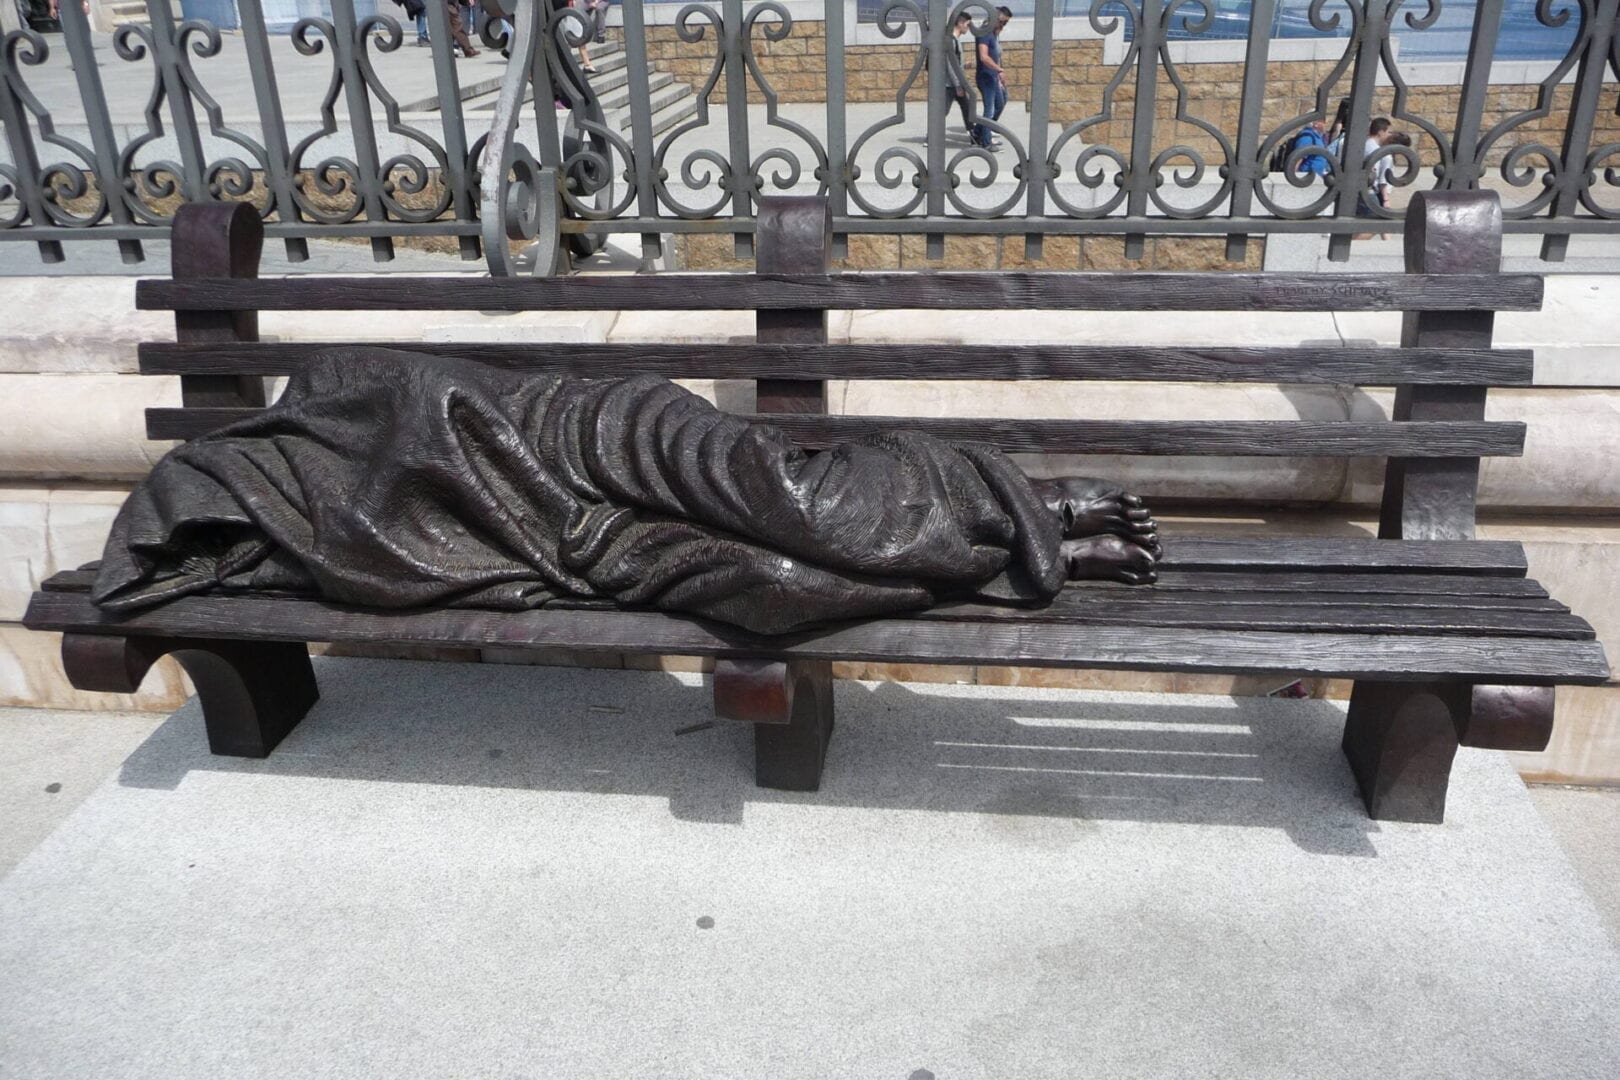 A statue of a person lying on a bench